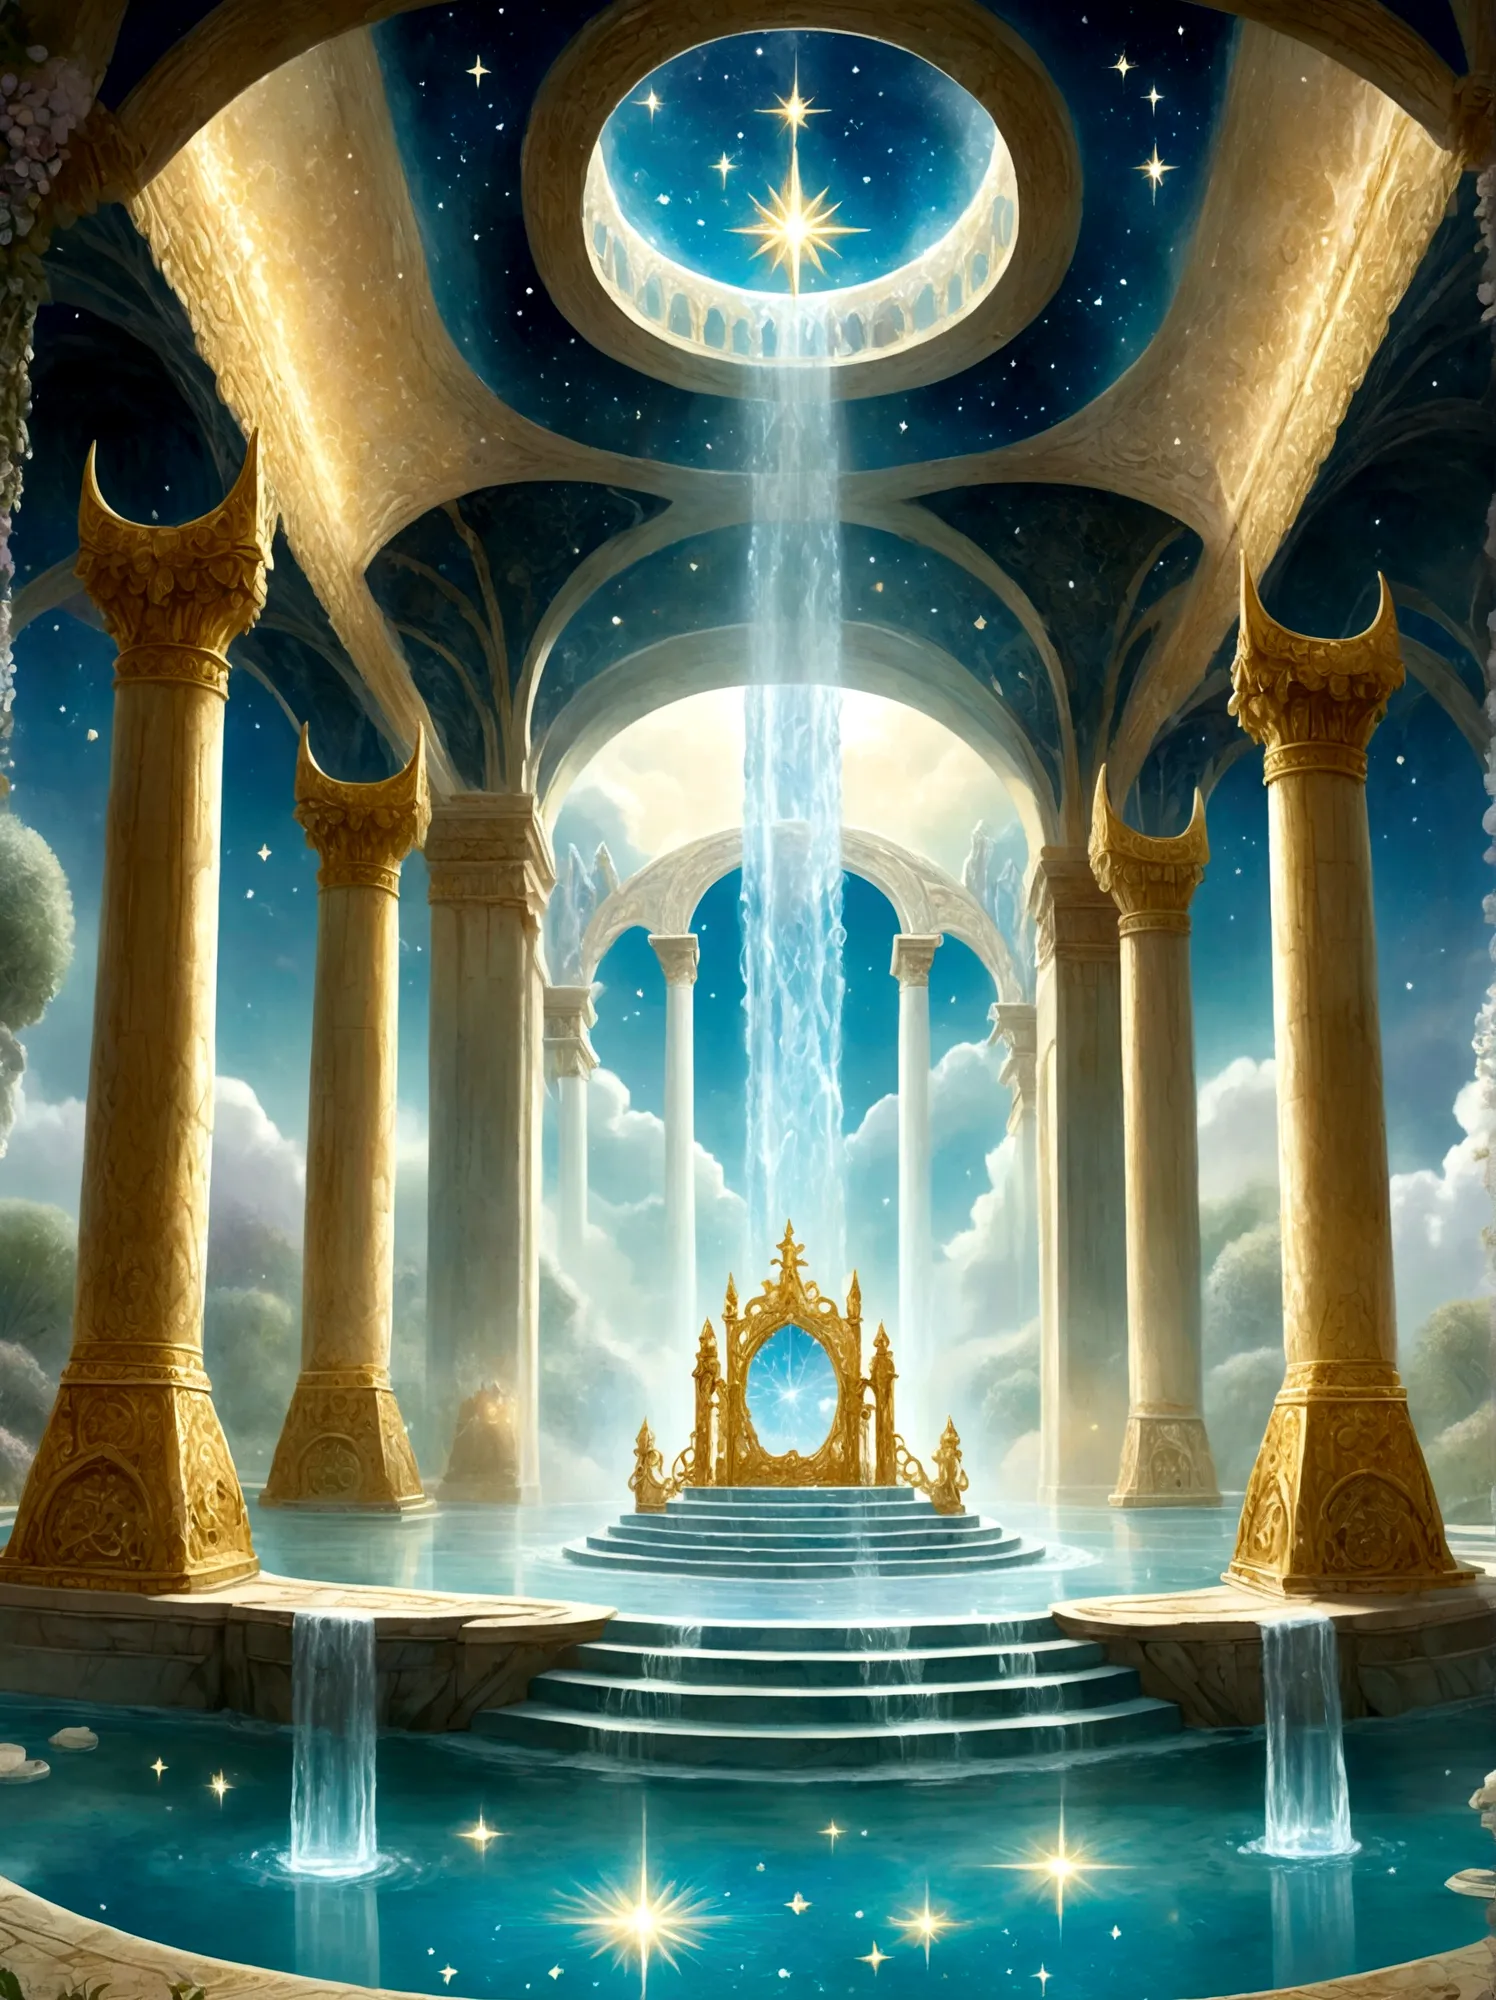 Imagine a majestic throne room beyond the human realm, as described in the first book of Enoch, The room is filled with grandeur...